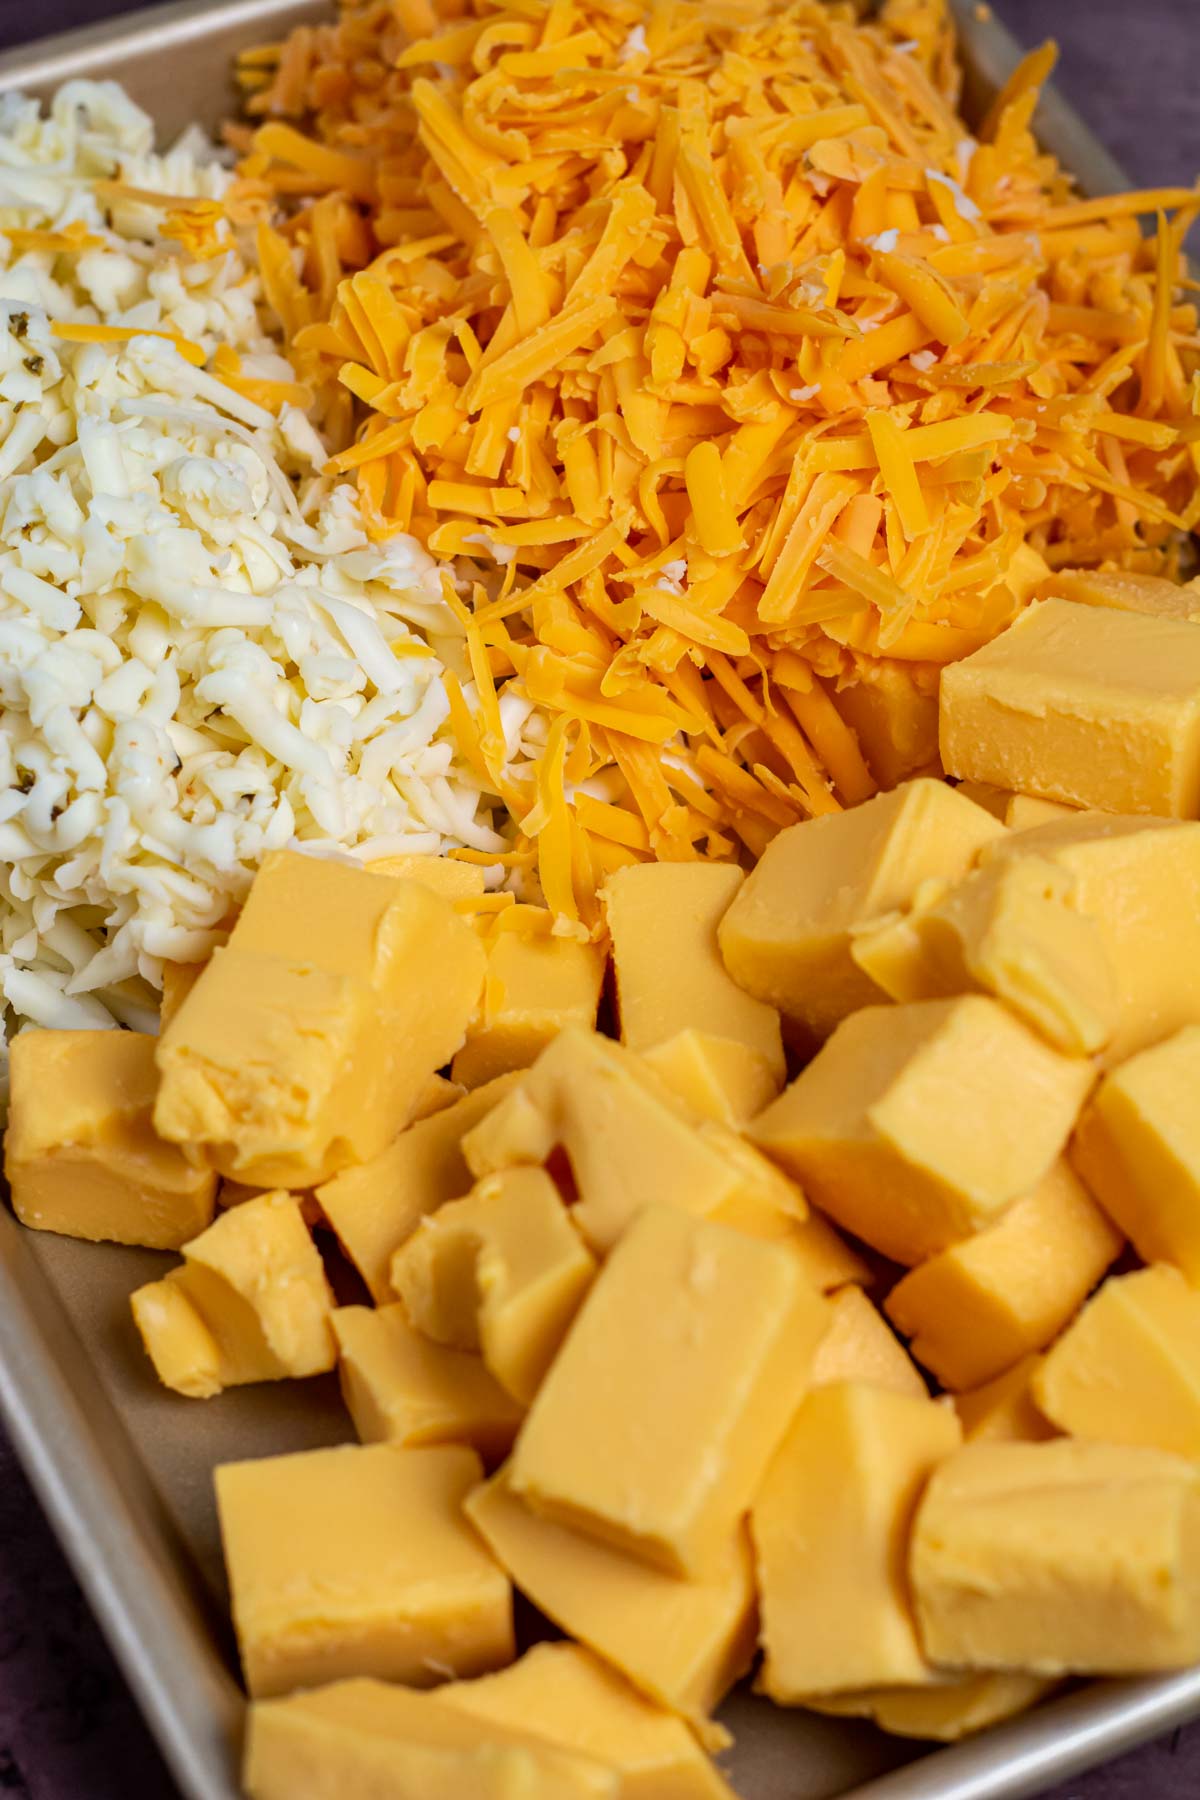 Cubed and shredded cheeses for the queso dip.